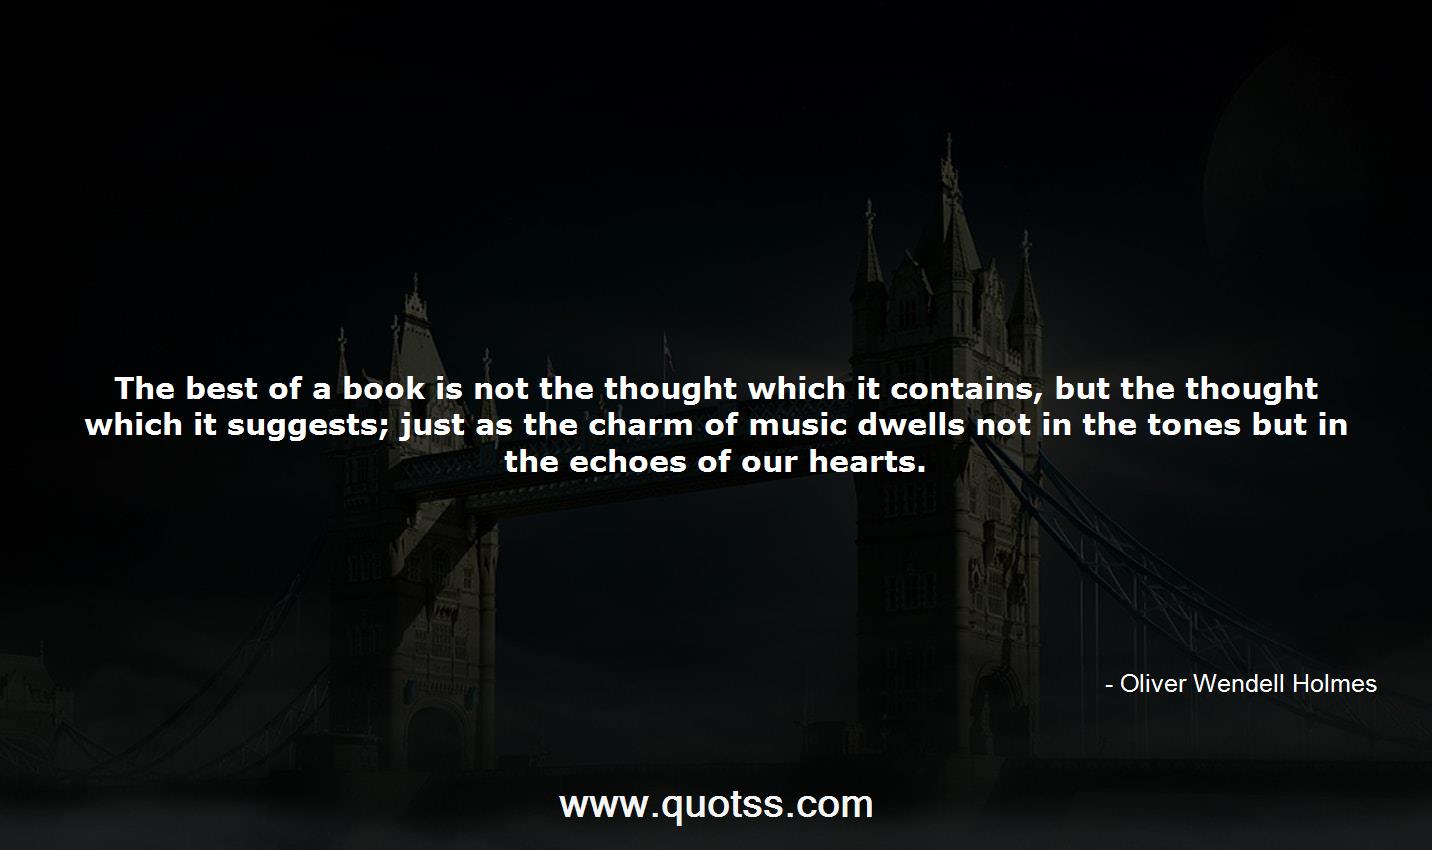 Oliver Wendell Holmes Quote on Quotss